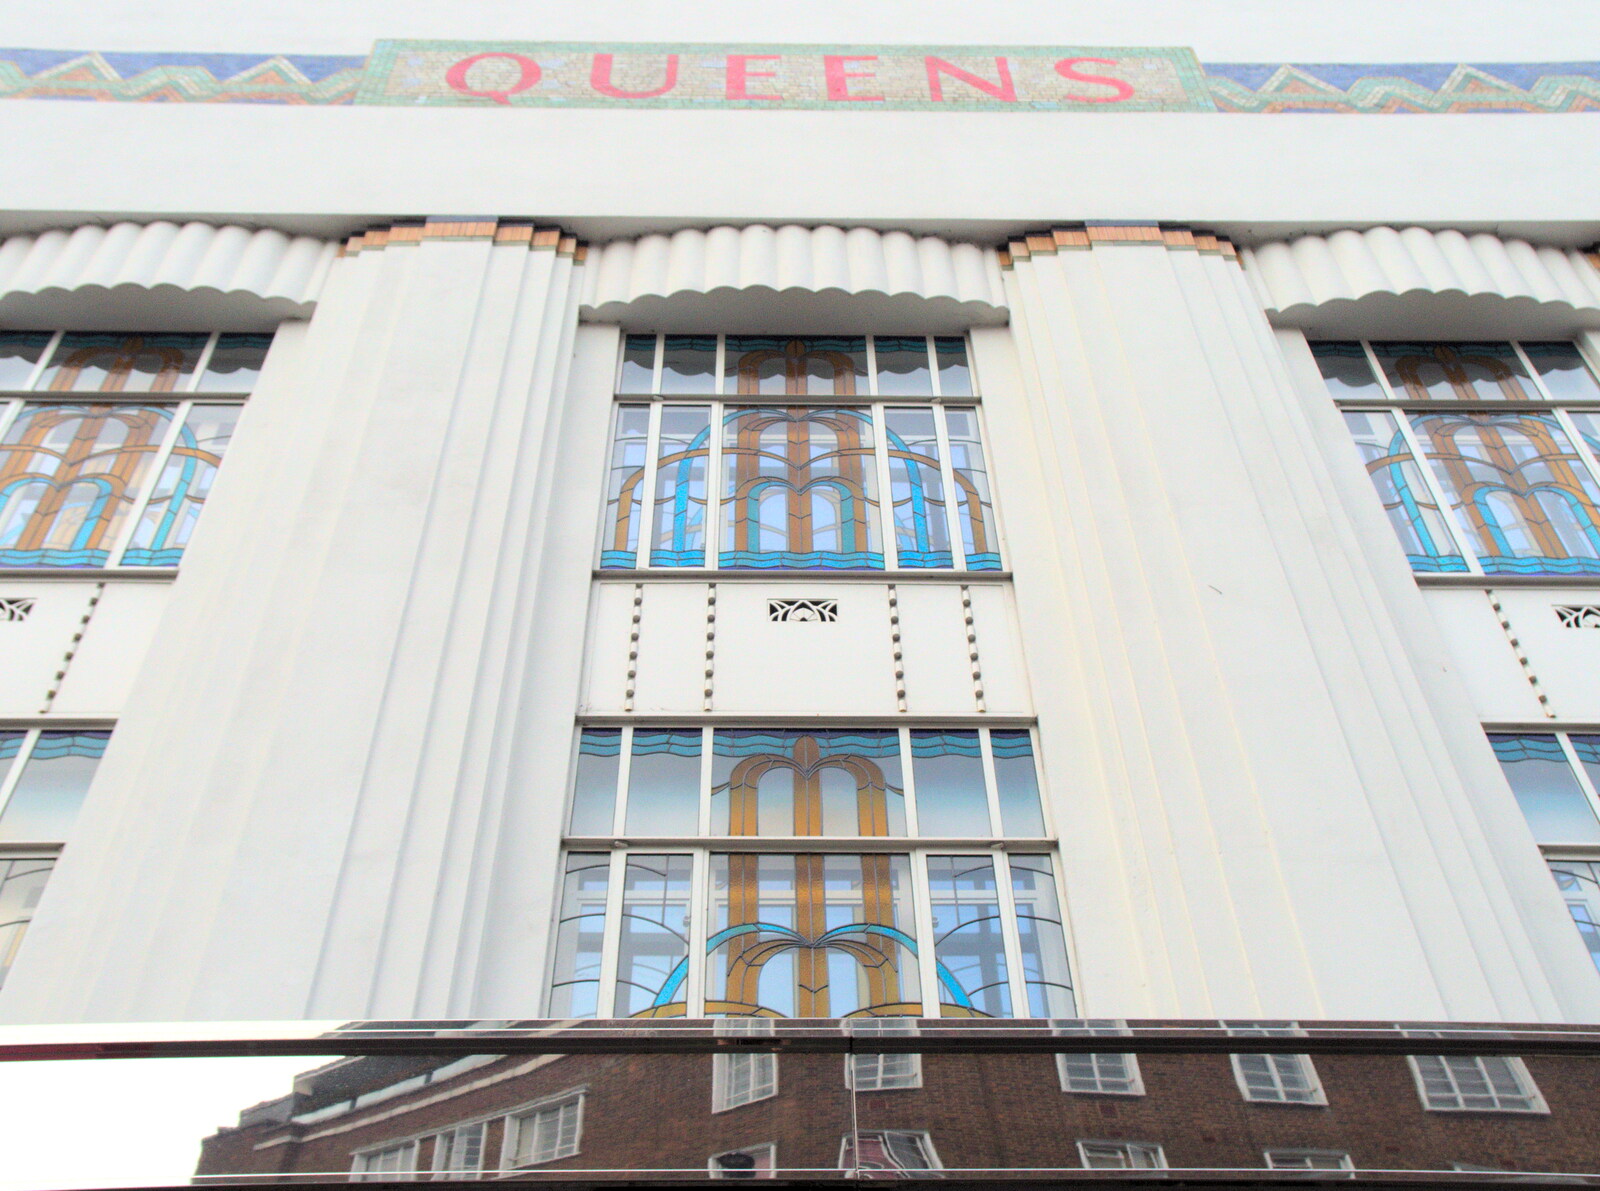 The restored Art Deco façade of Queens Cinema from A Work Lunch in Nandos, Bayswater Grove, West London - 20th December 2017